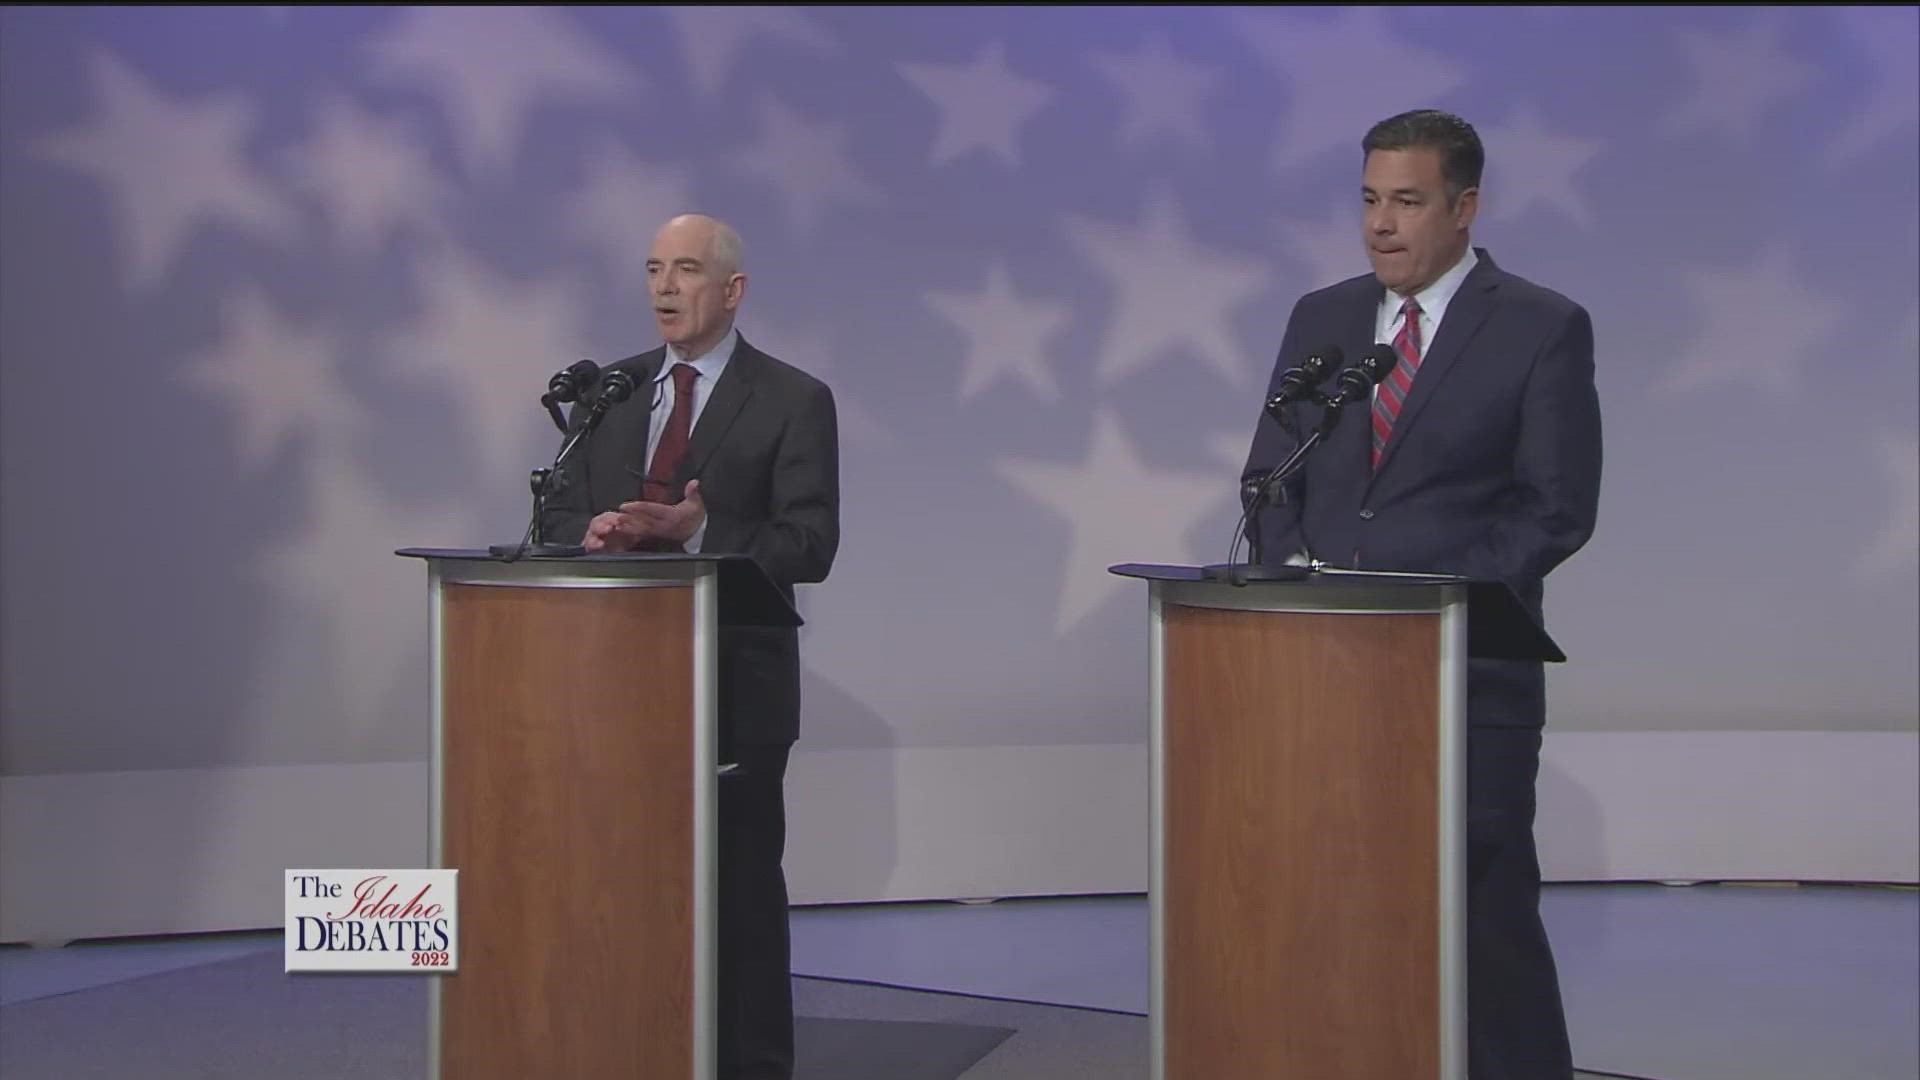 The two rivals to be the next Idaho Attorney General clashed in a live, televised debate Monday, on issues ranging from abortion laws to water to school vouchers.